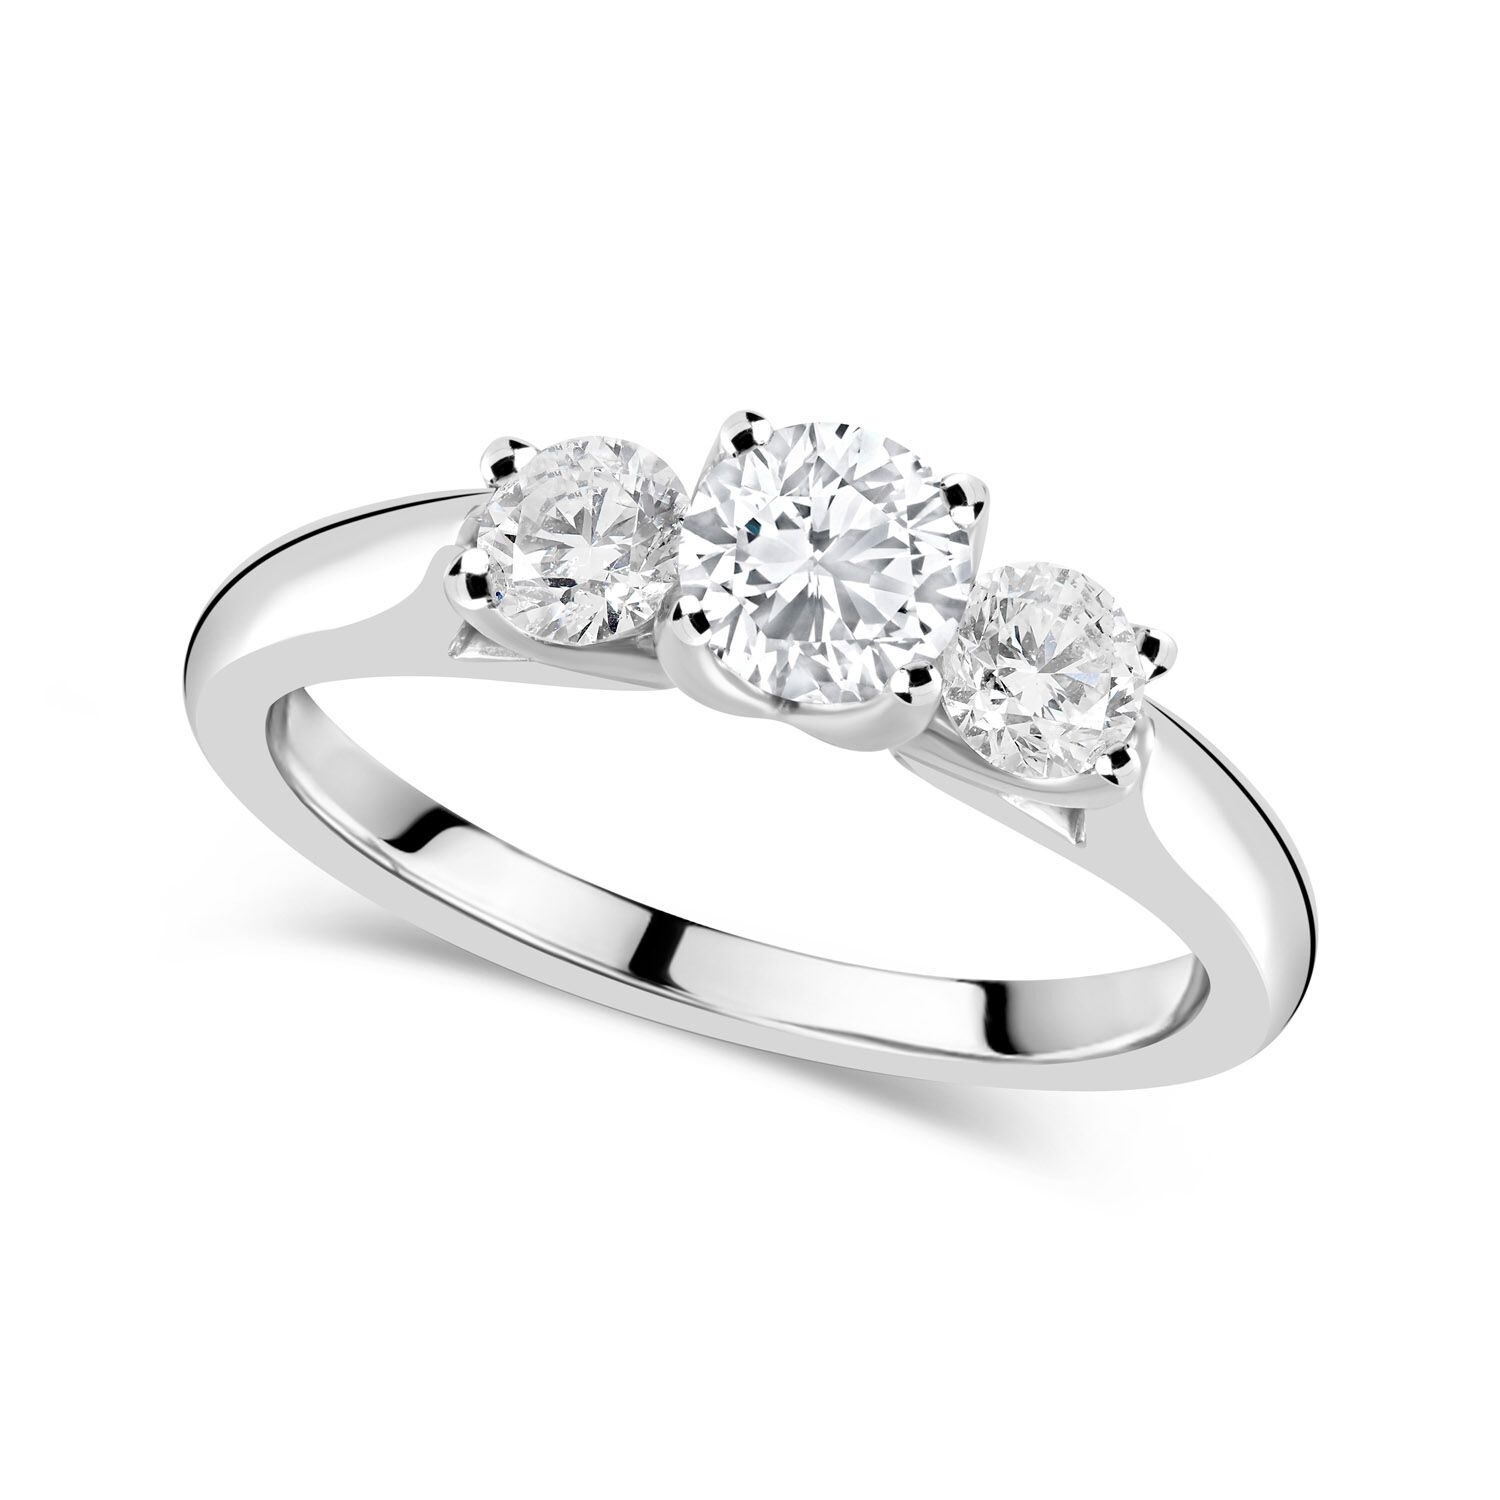 Orchid Setting 18ct White Gold 5 Stone 0.75ct Diamond Ring